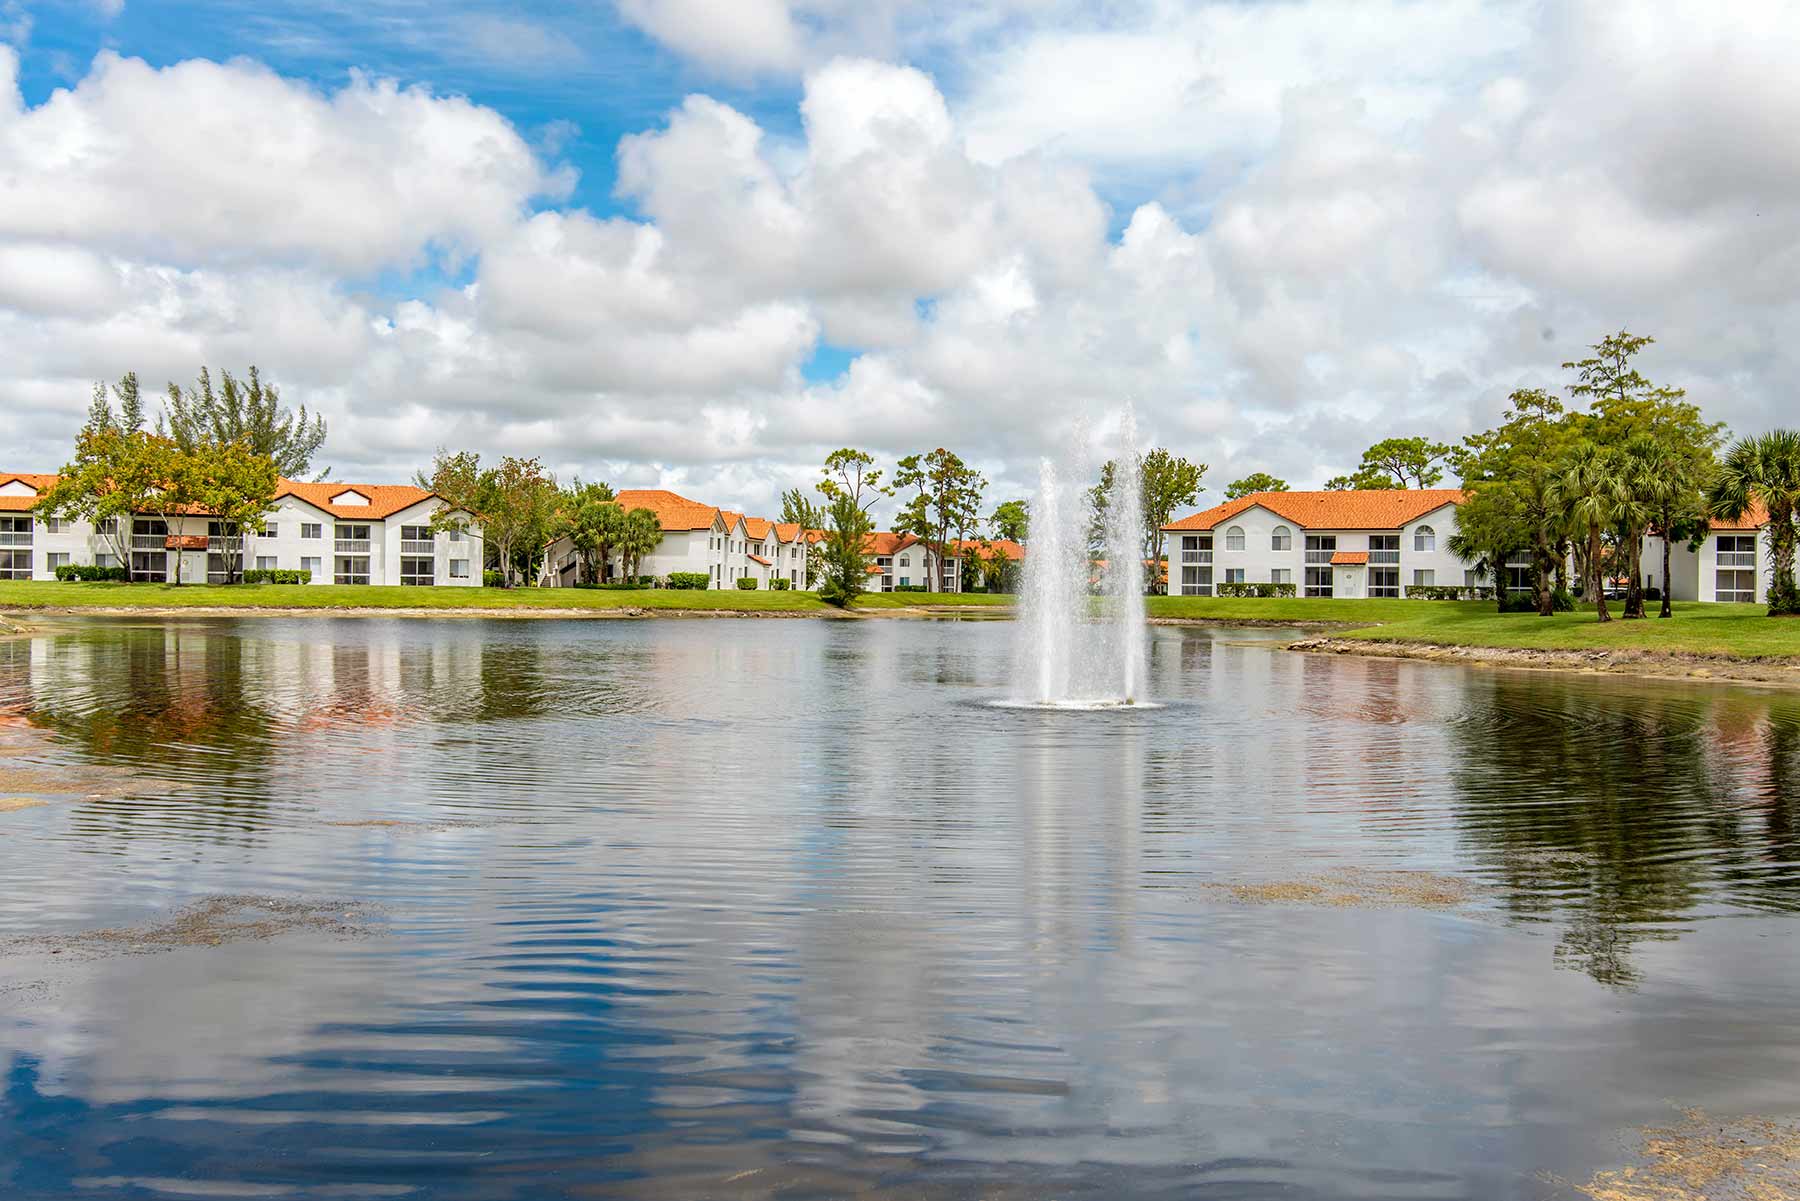 Lake with fountain surrounded by residential buildings